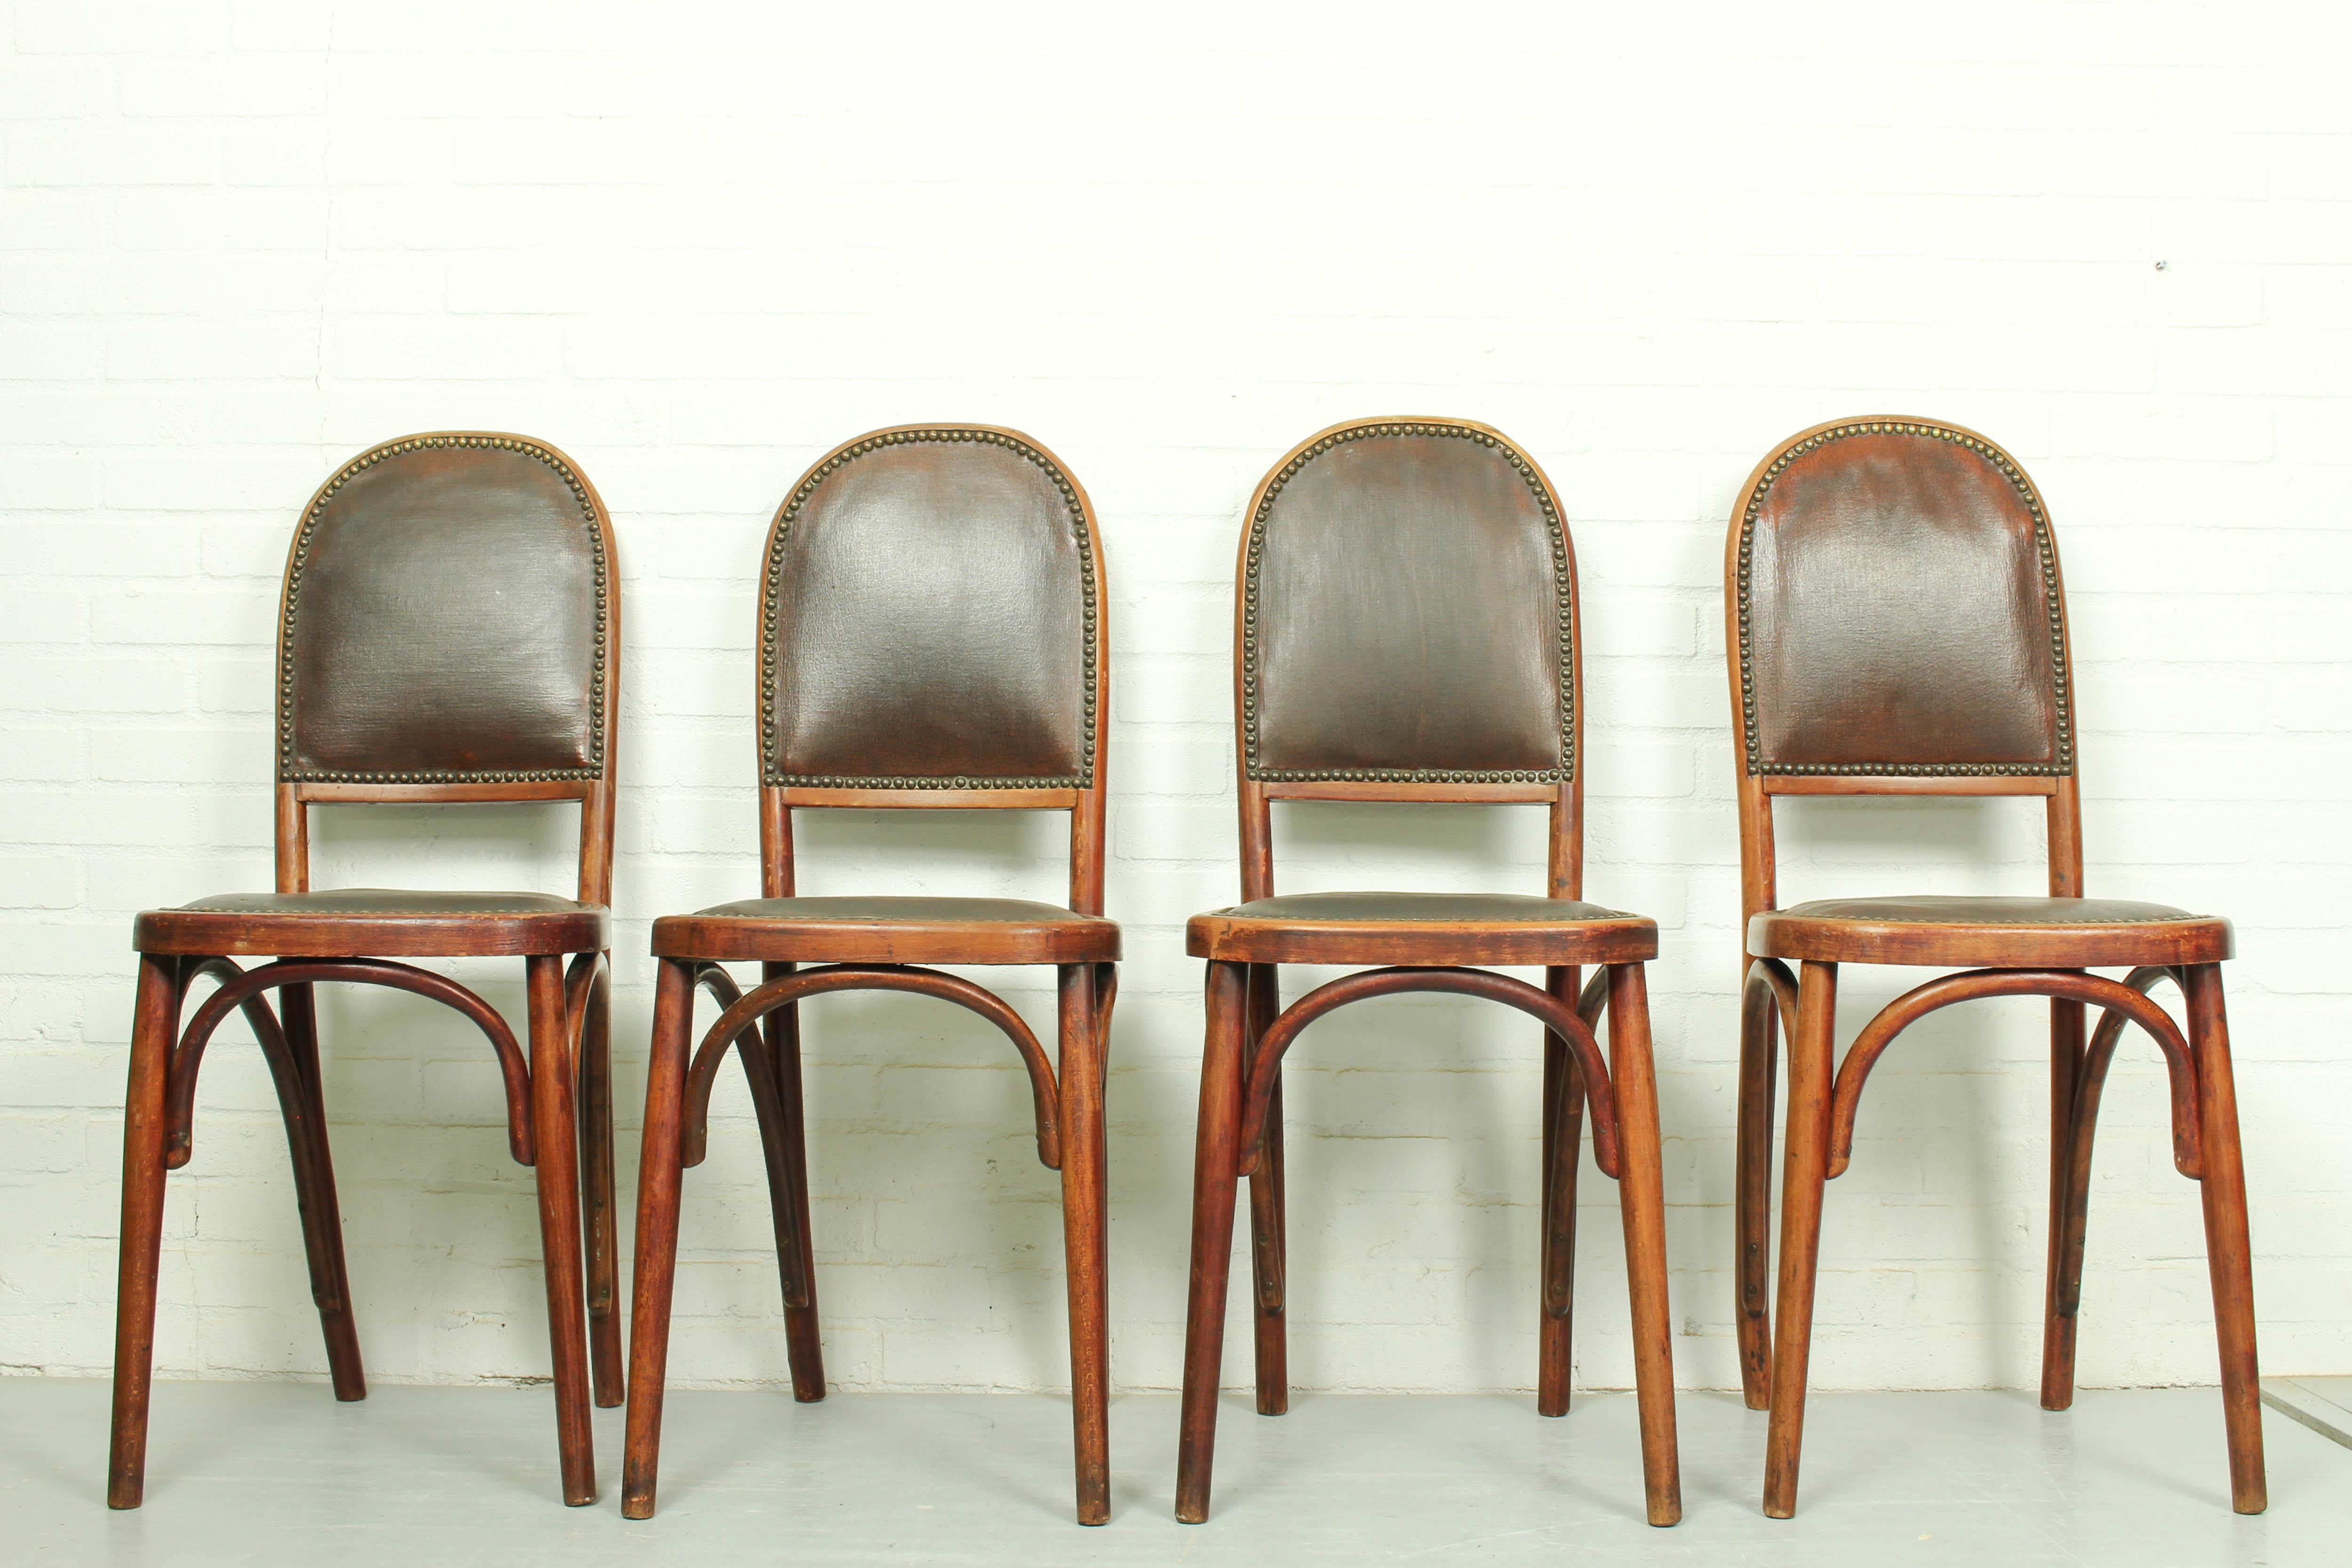  Art Nouveau Bentwood and Leather Dining Room Set from Fischel, c1910 For Sale 2